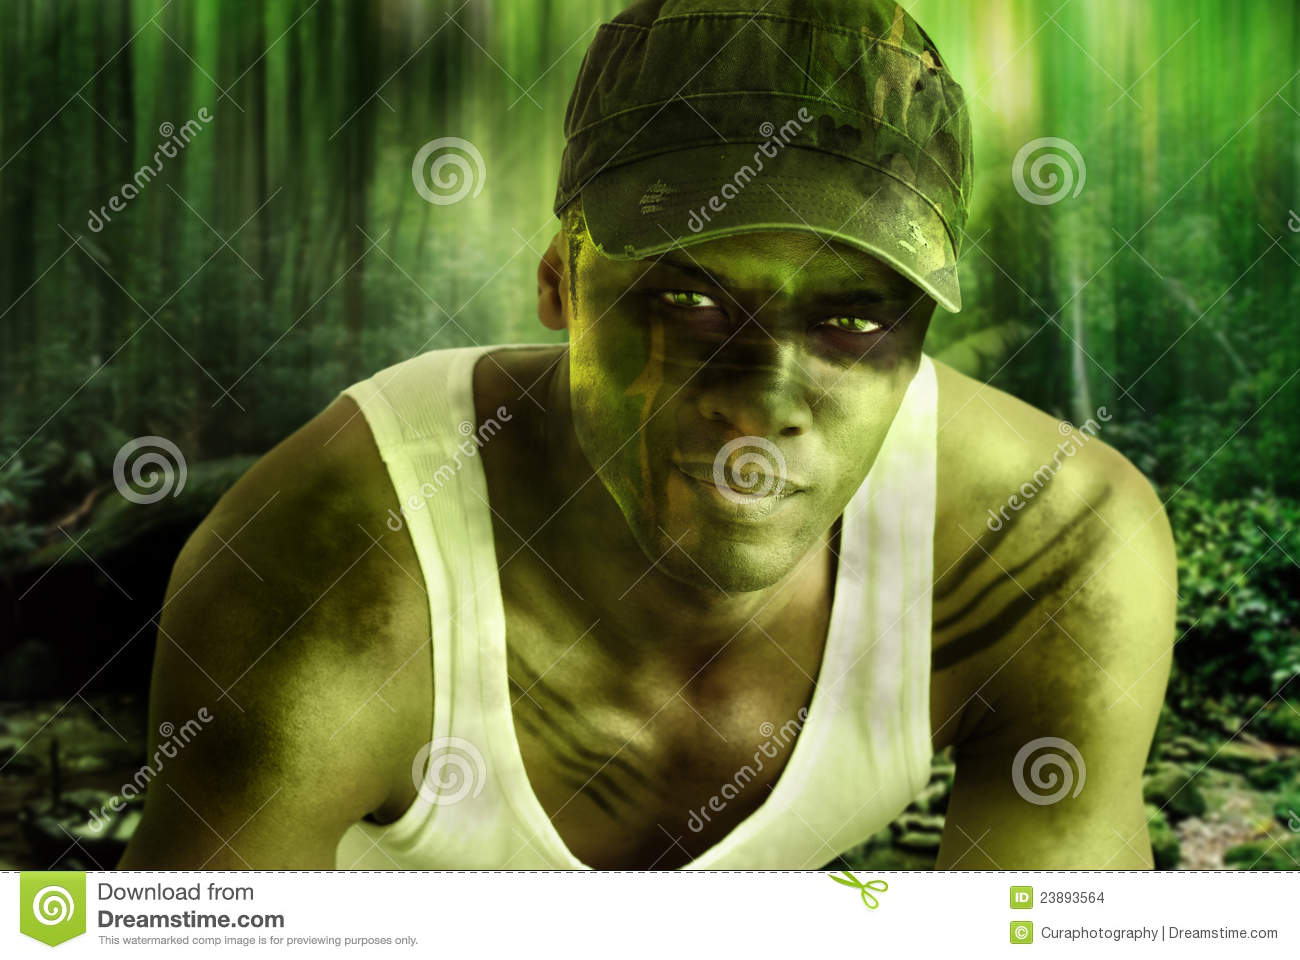 Fantasy Portrait Of A Cool Army Hero Guy With Face Paint And Camo Hat